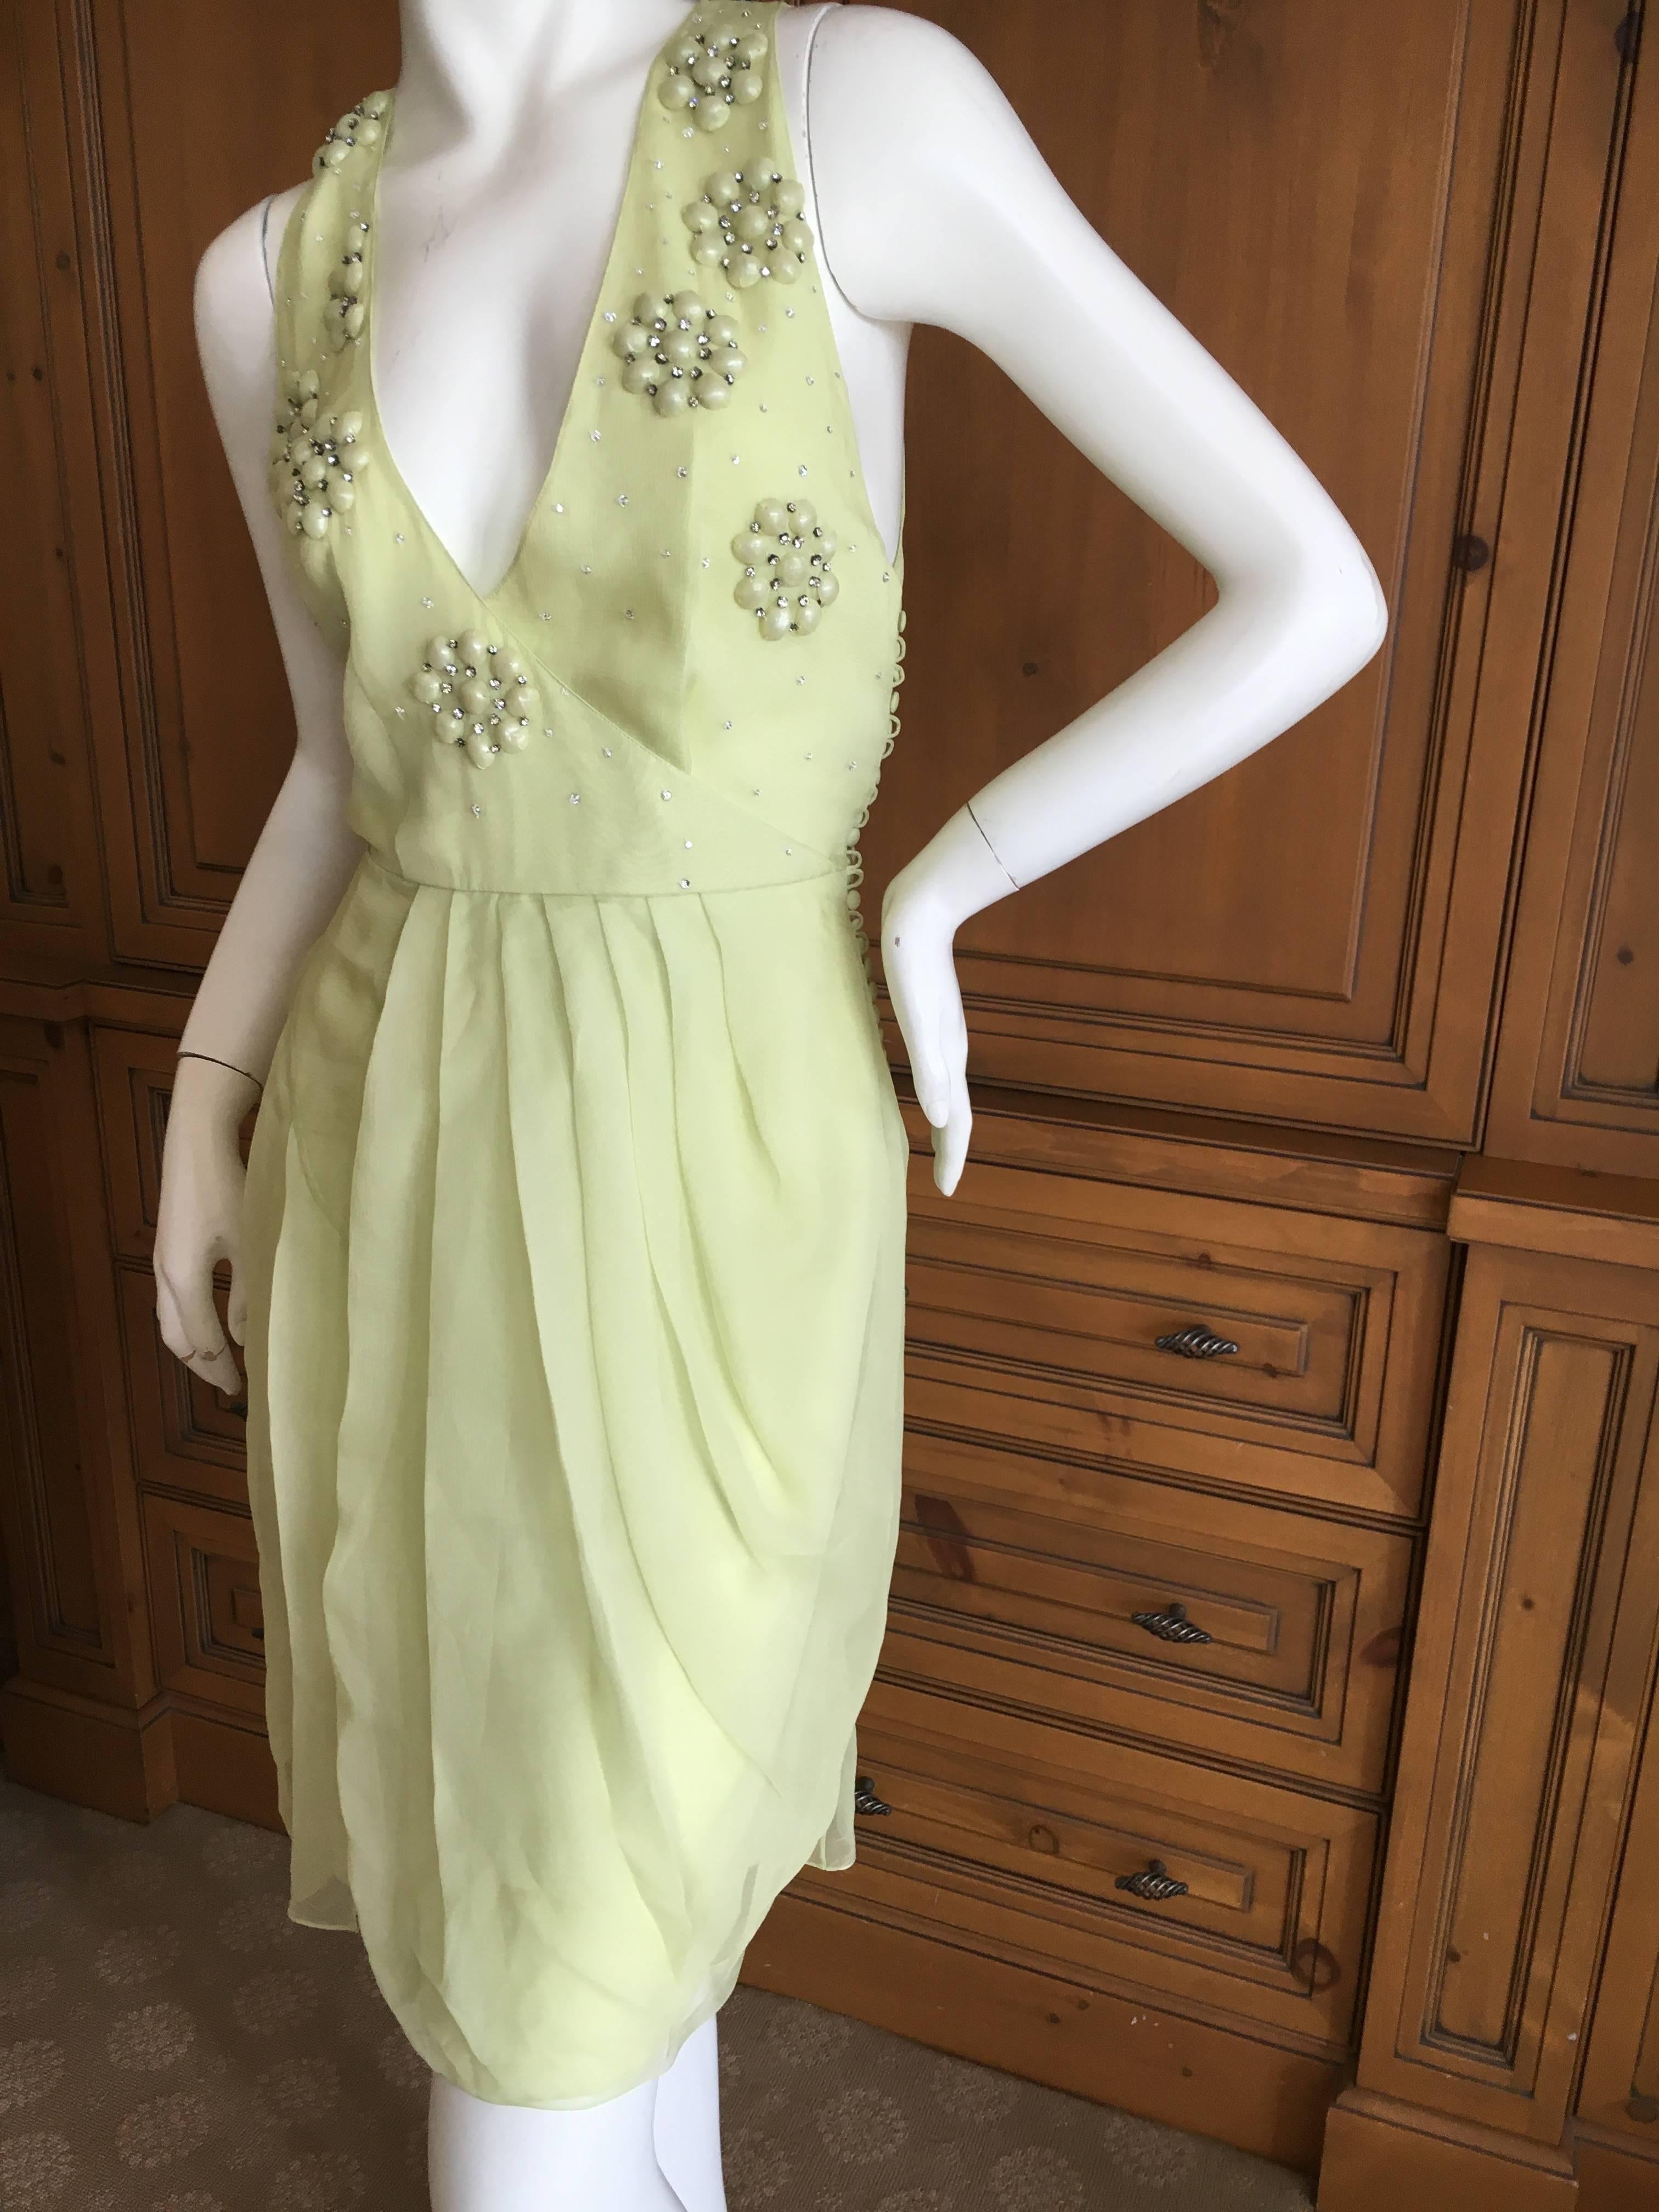 Wonderful pale green silk chiffon dress from Christian Dior.
I'm not certain if this is Galliano or Ferre.
Embellished with stylized florette's , created with pearl cabachon's covered in the green silk with crystal accents
Size 38
Bust